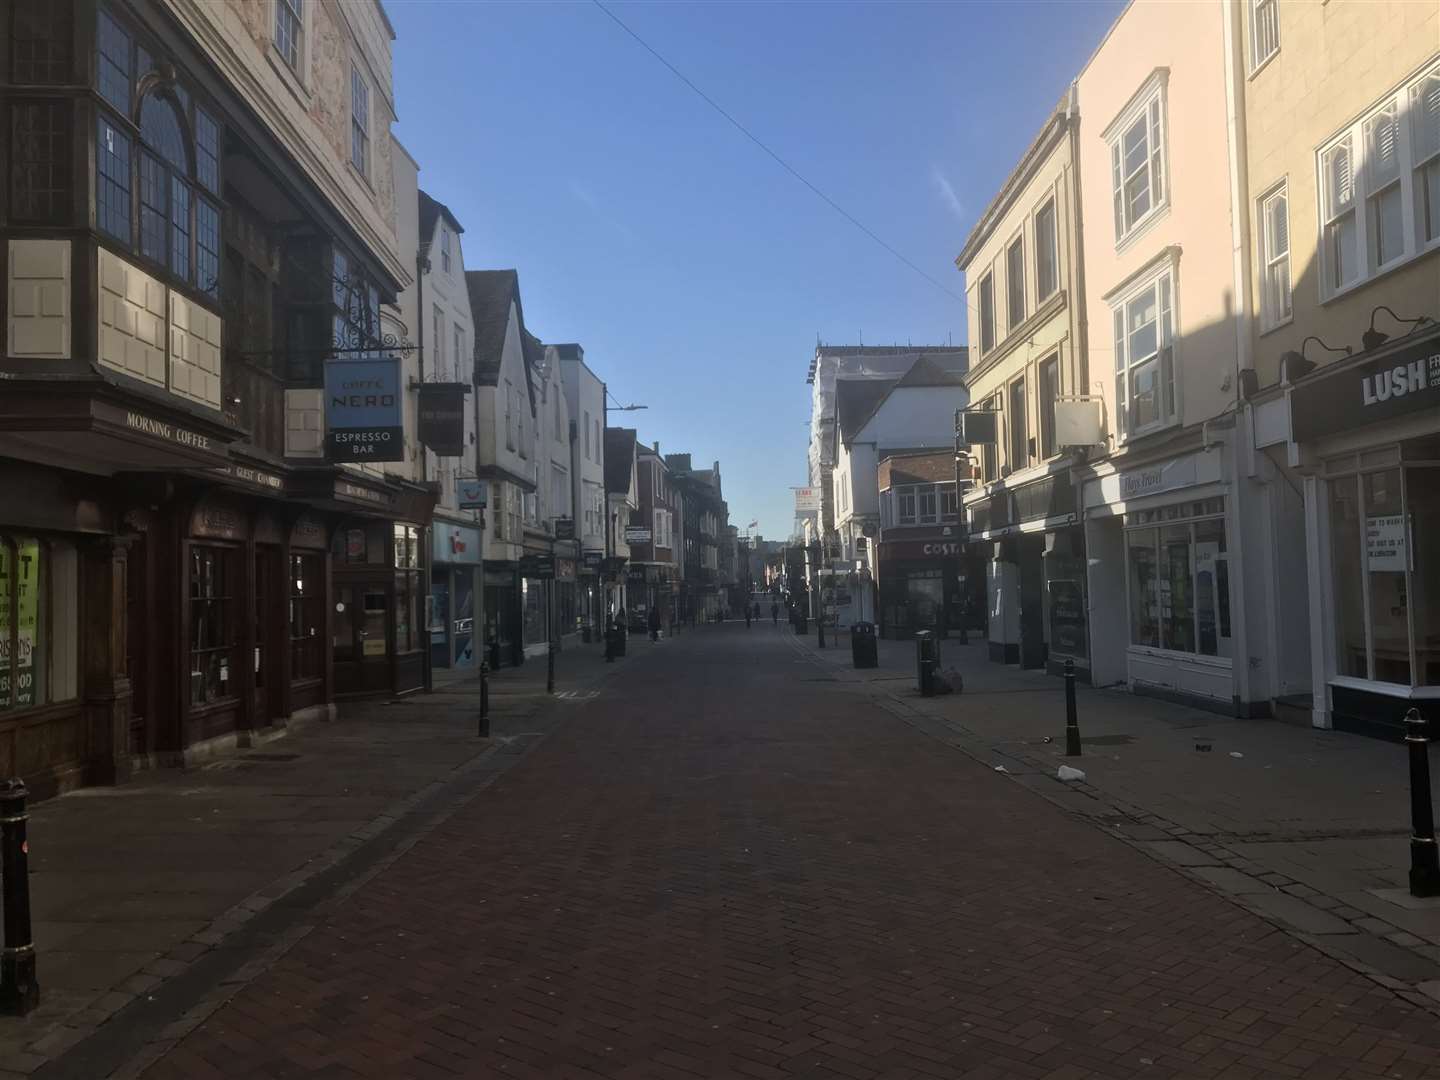 The centre of Canterbury has had few visitors since Britain was put in lockdown